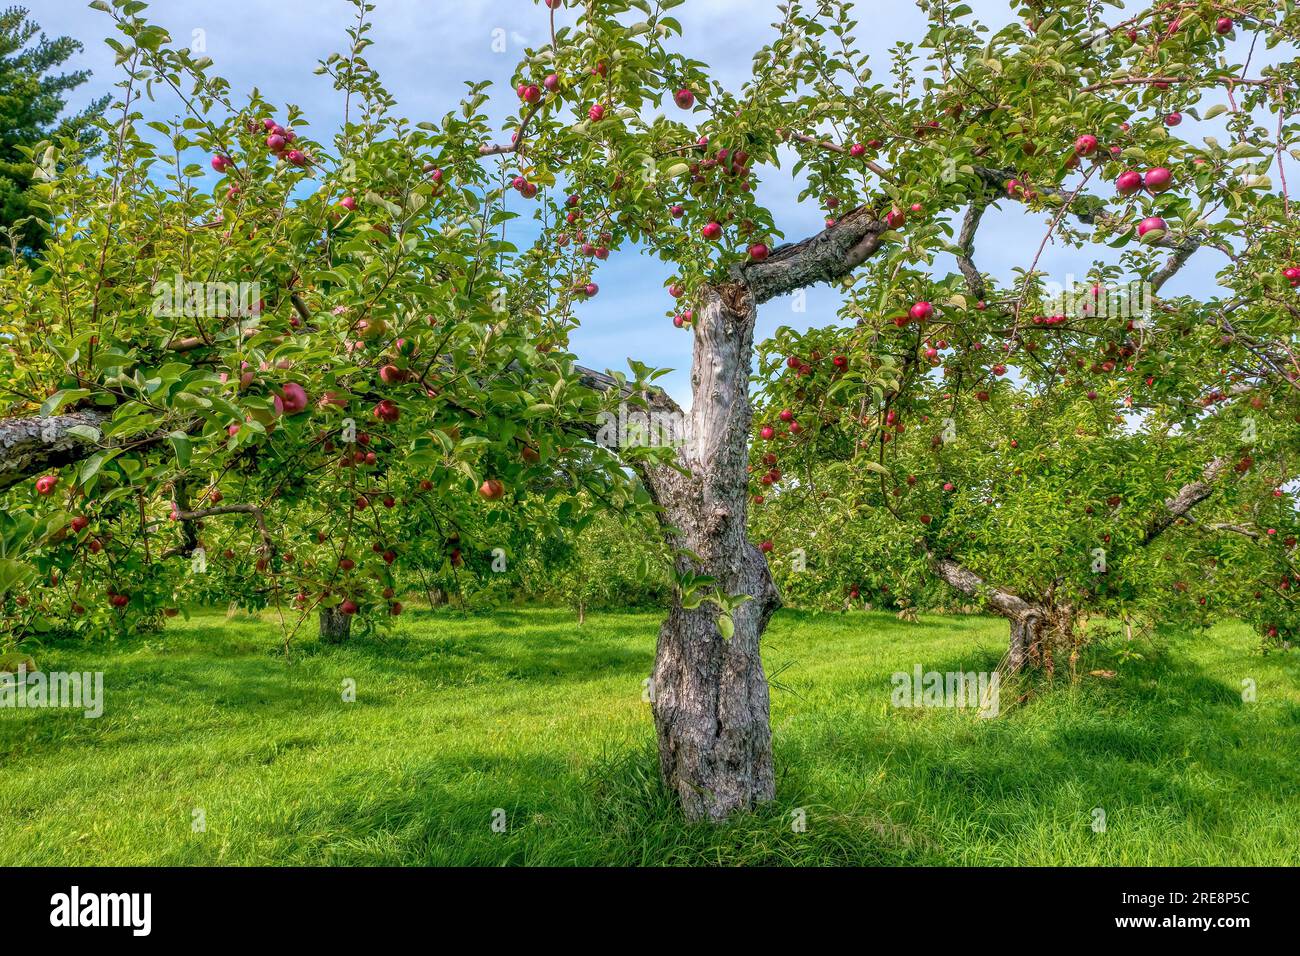 A gnarled old McIntosh apple tree loaded with ripe apples in a picturesque orchard in the Eastern Townships, Quebec, Canada. Stock Photo